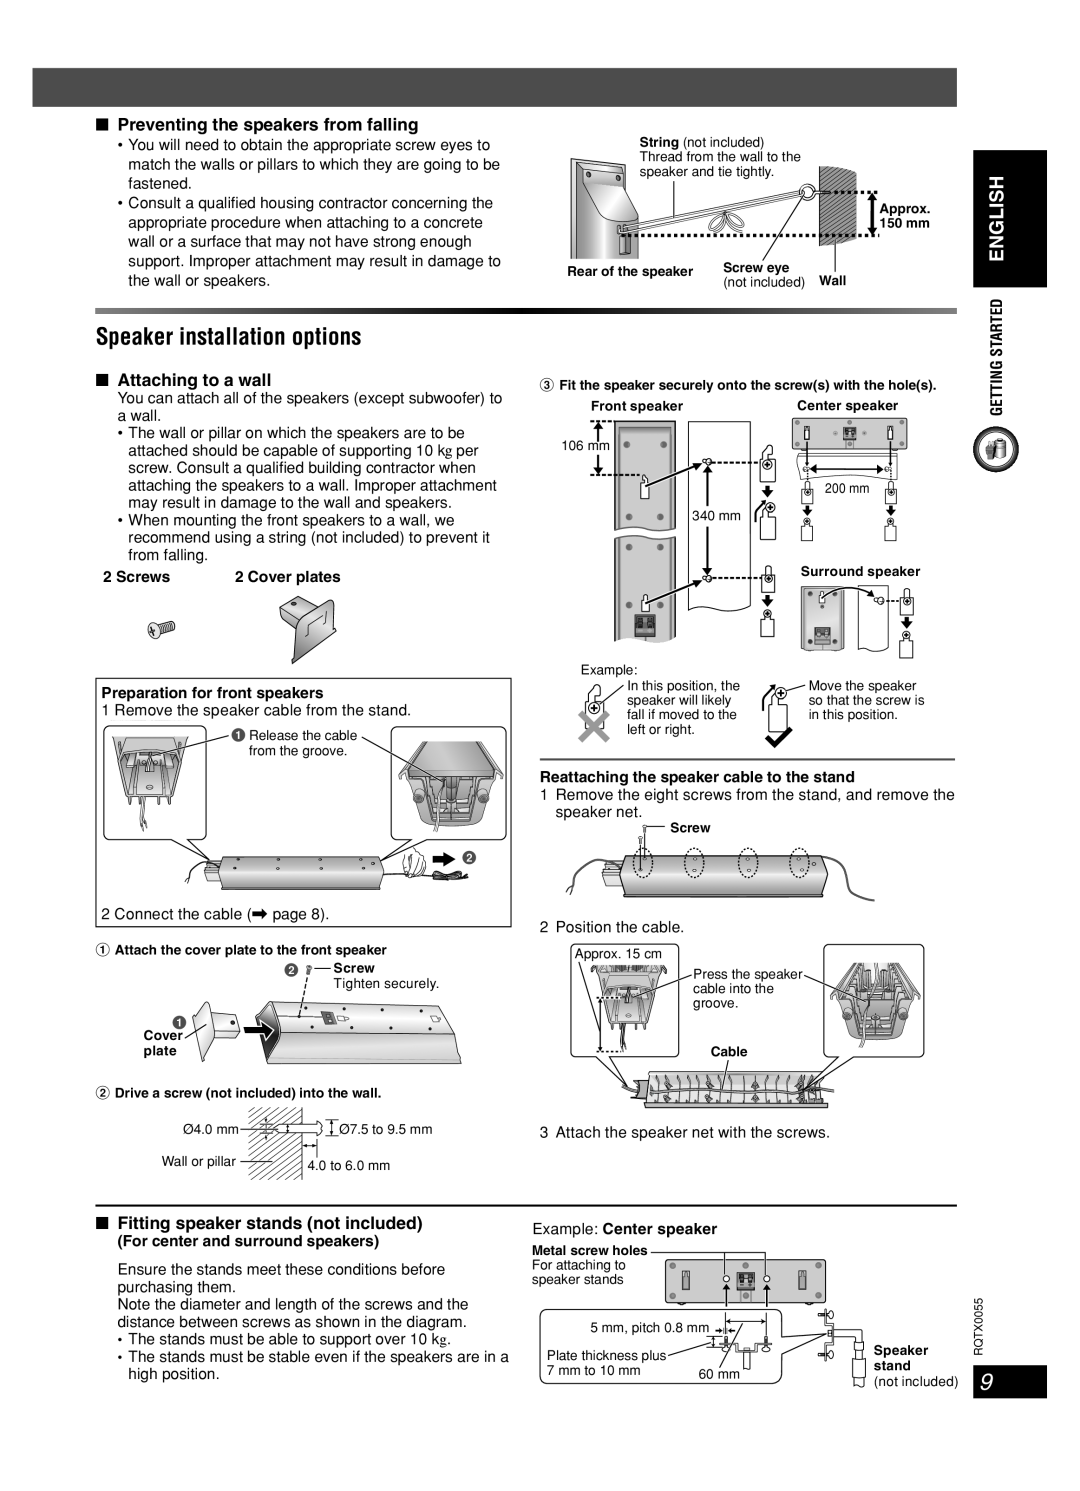 Panasonic SC-PT 250 manual Speaker installation options, English, Preventing the speakers from falling, Attaching to a wall 